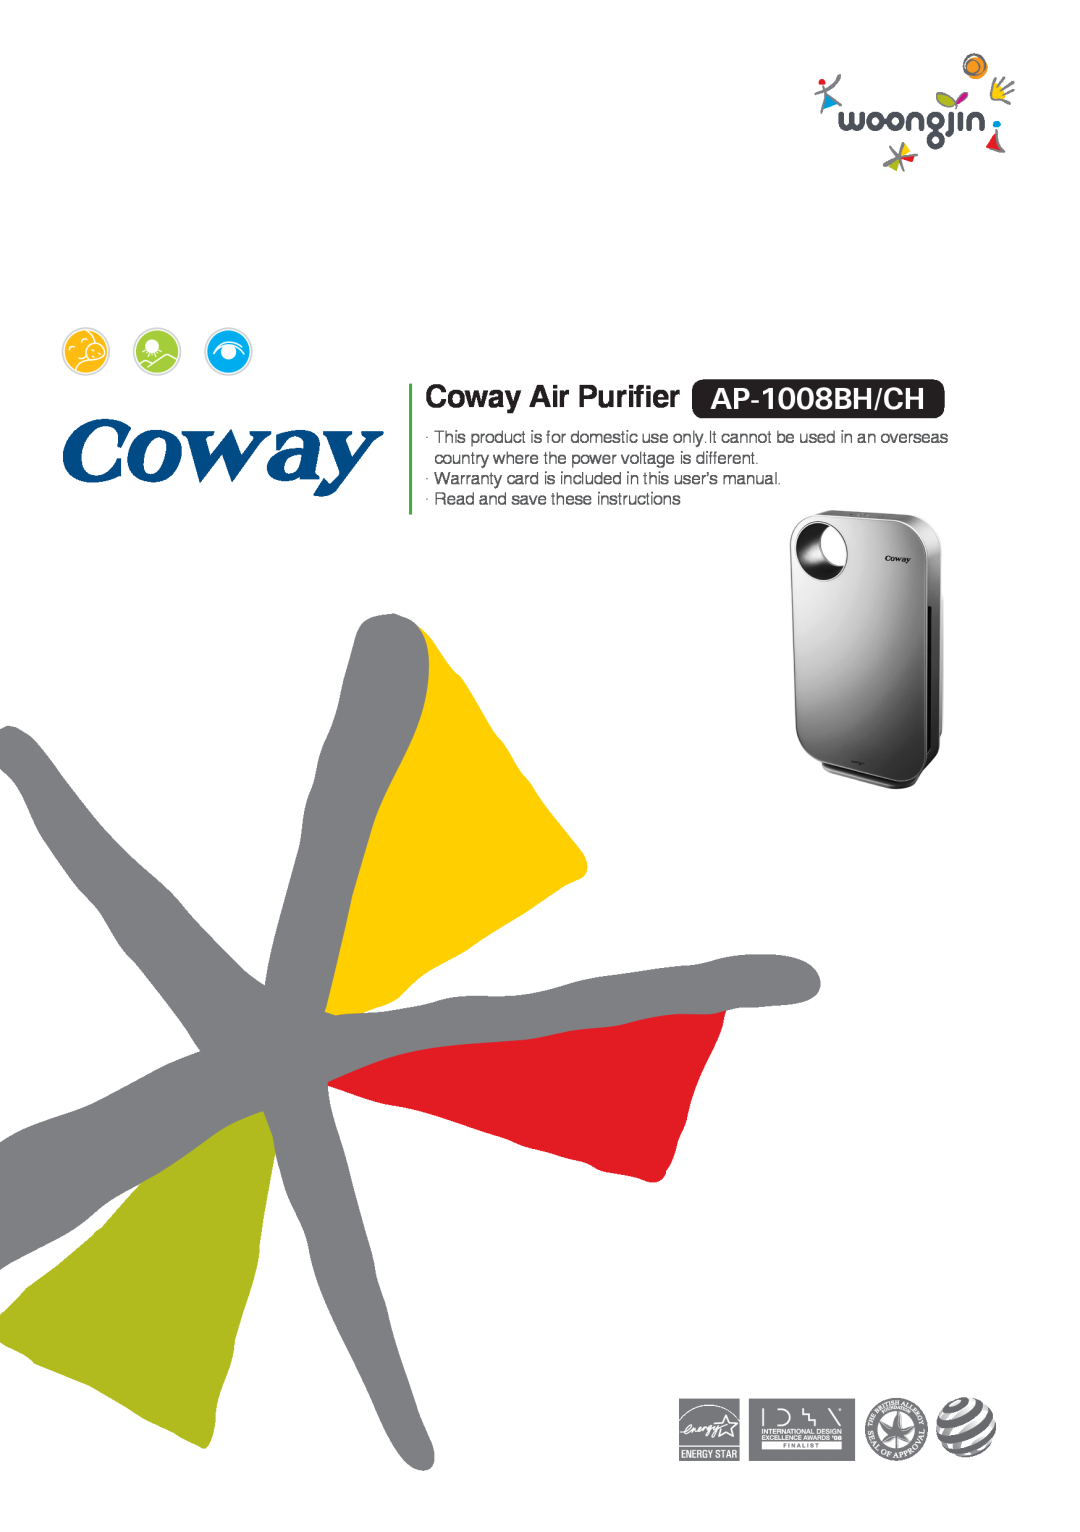 Coway AP-1008CH warranty Coway Air Purifier AP-1008BH/CH, ·Read and save these instructions 